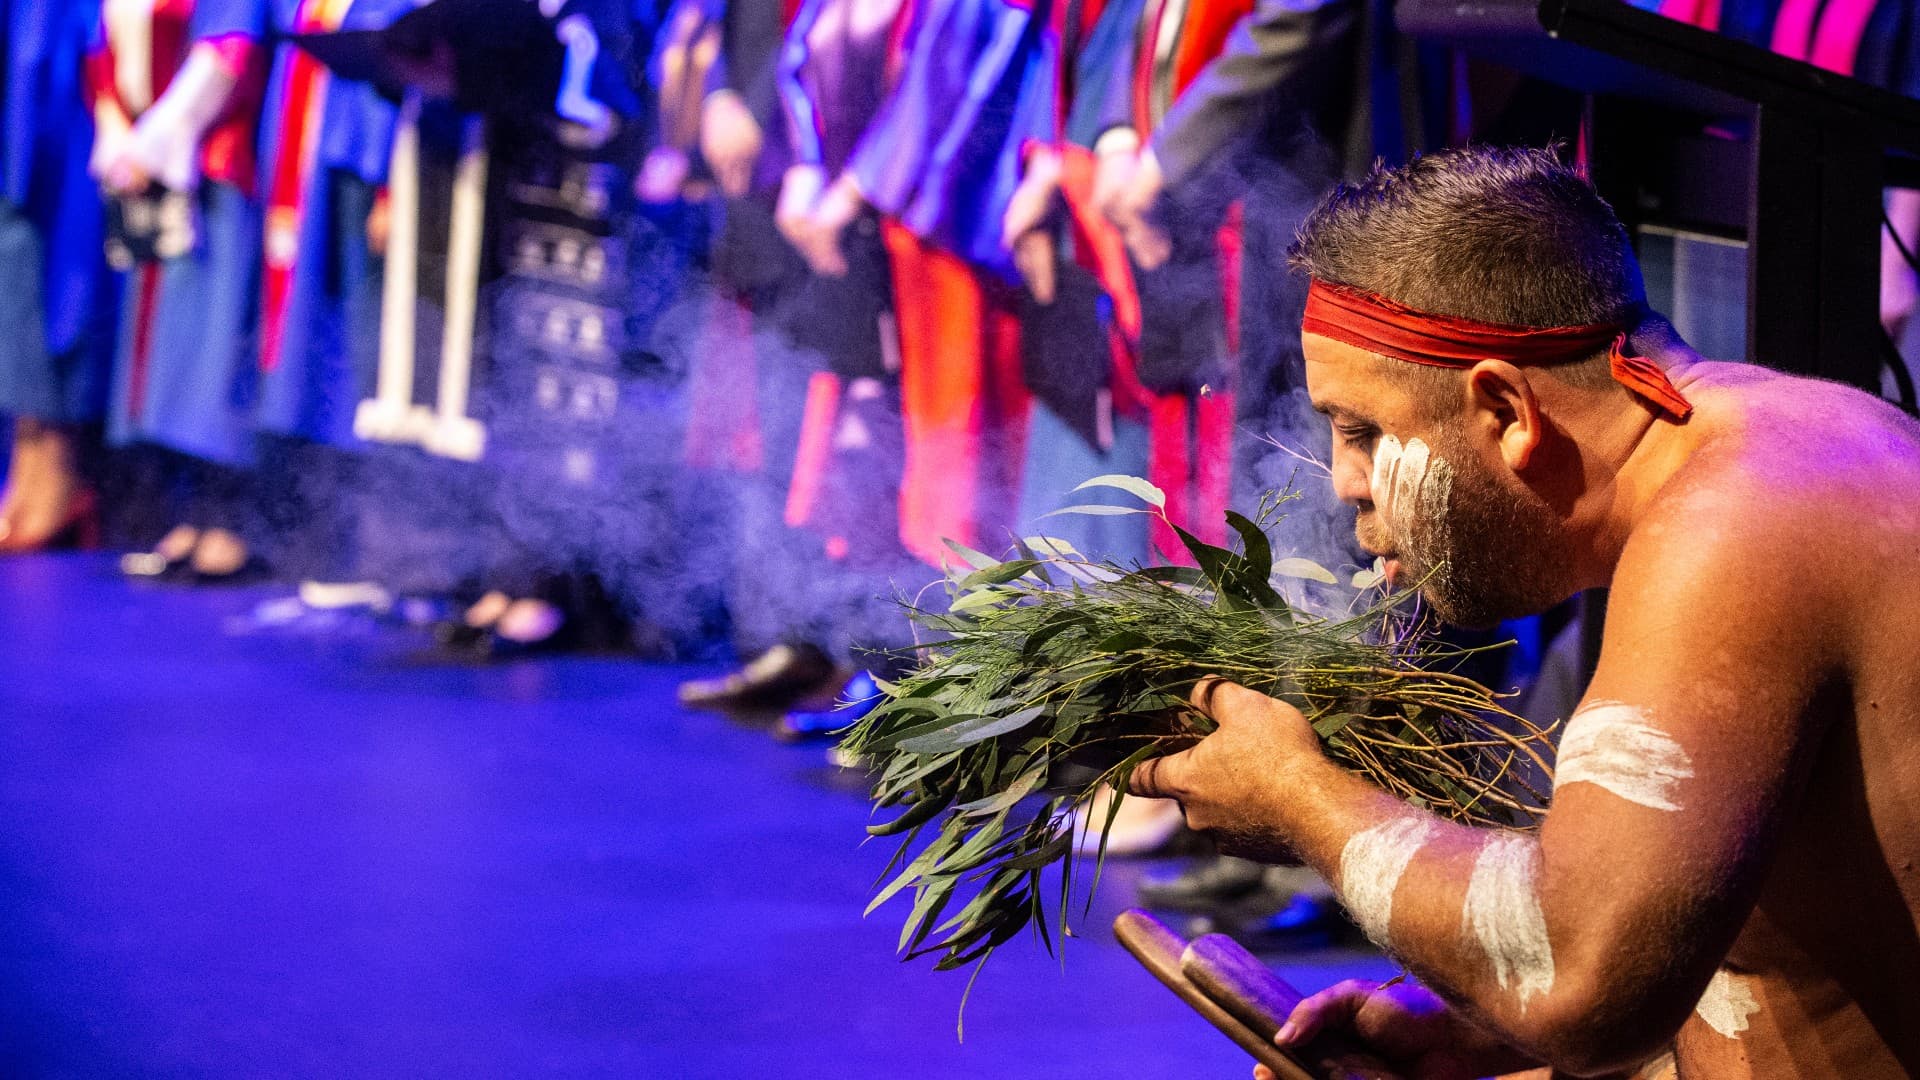 An Aboriginal Elders blows on a handful of leaves during a smoking ceremony for the Shoalhaven graduations. Photo: Paul Jones